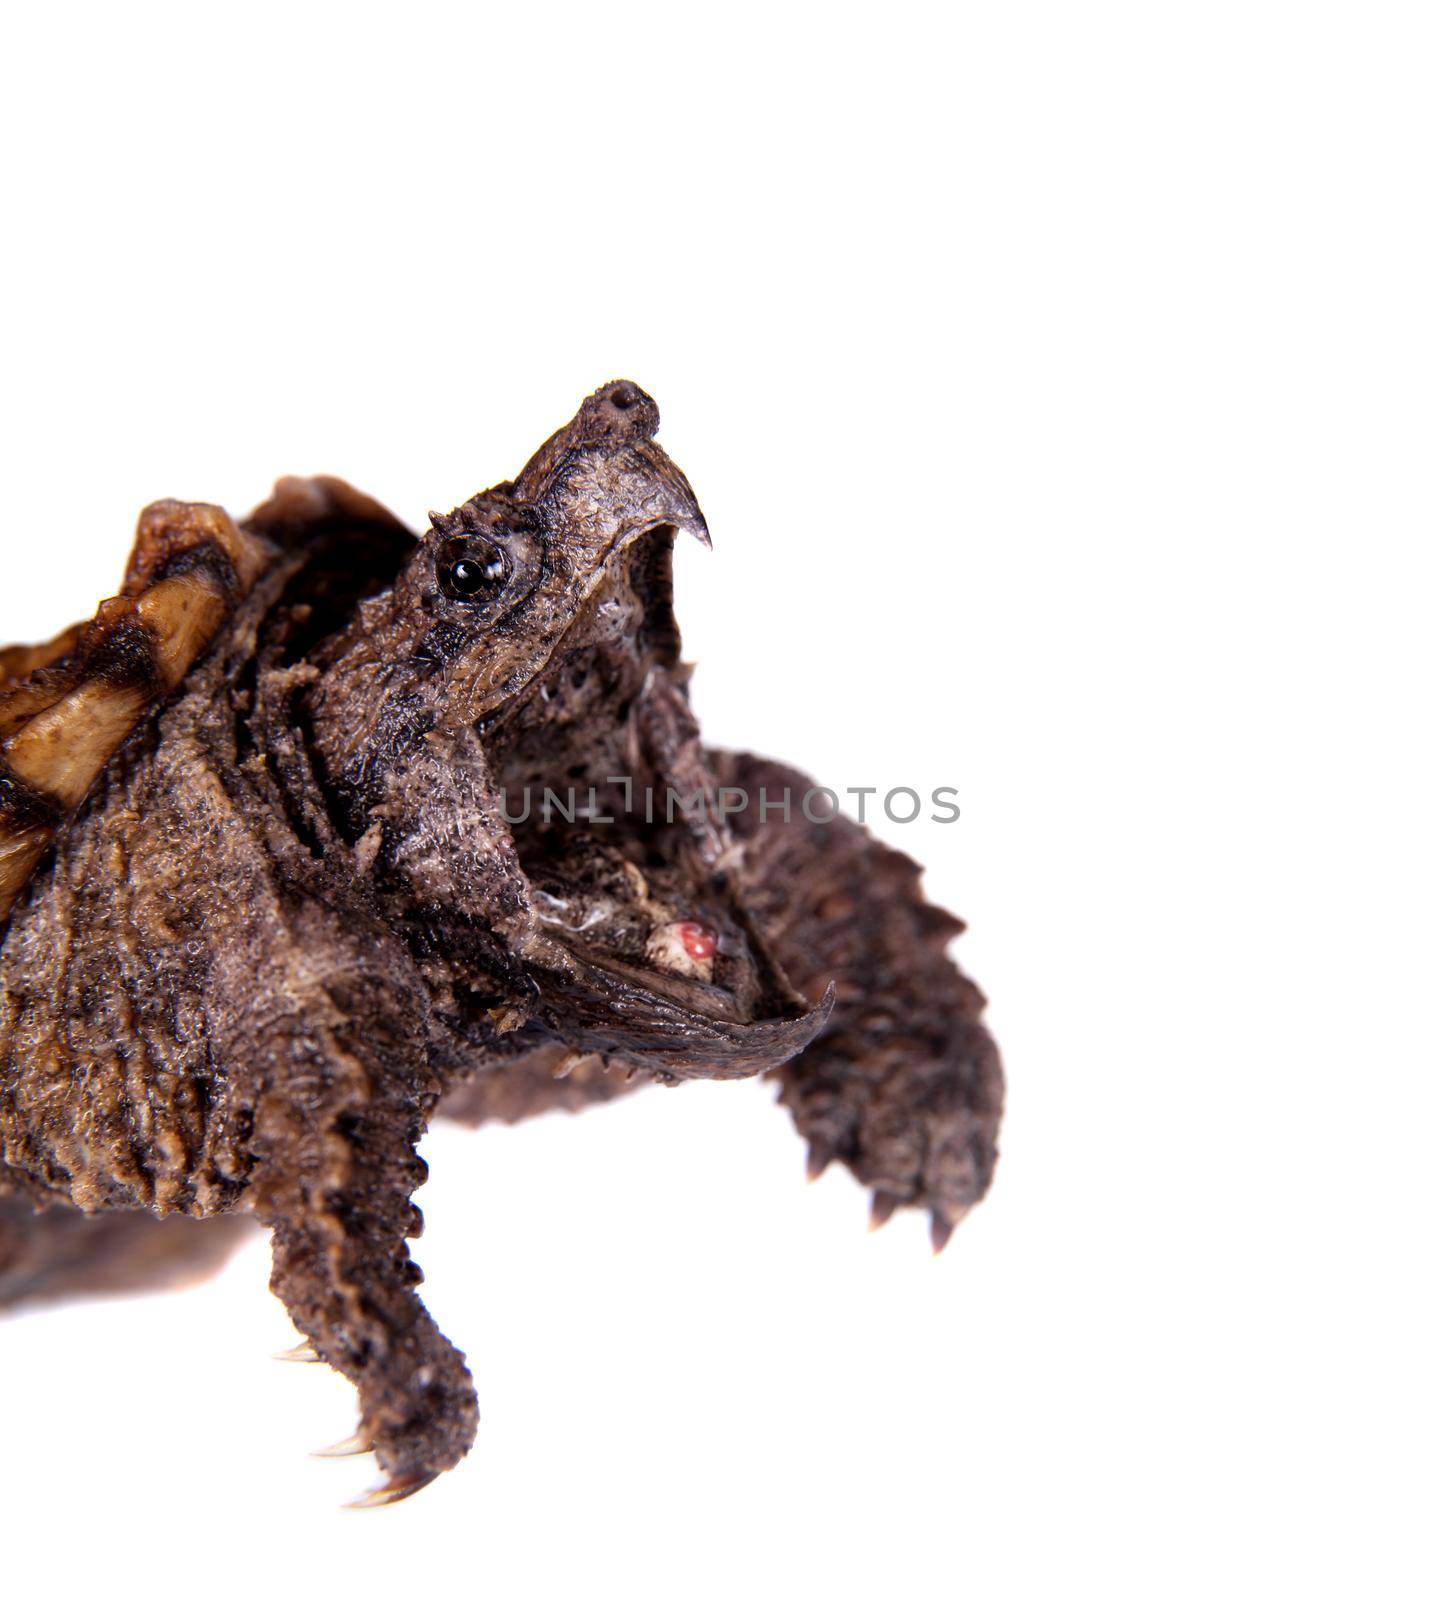 Alligator snapping turtle on white by RosaJay